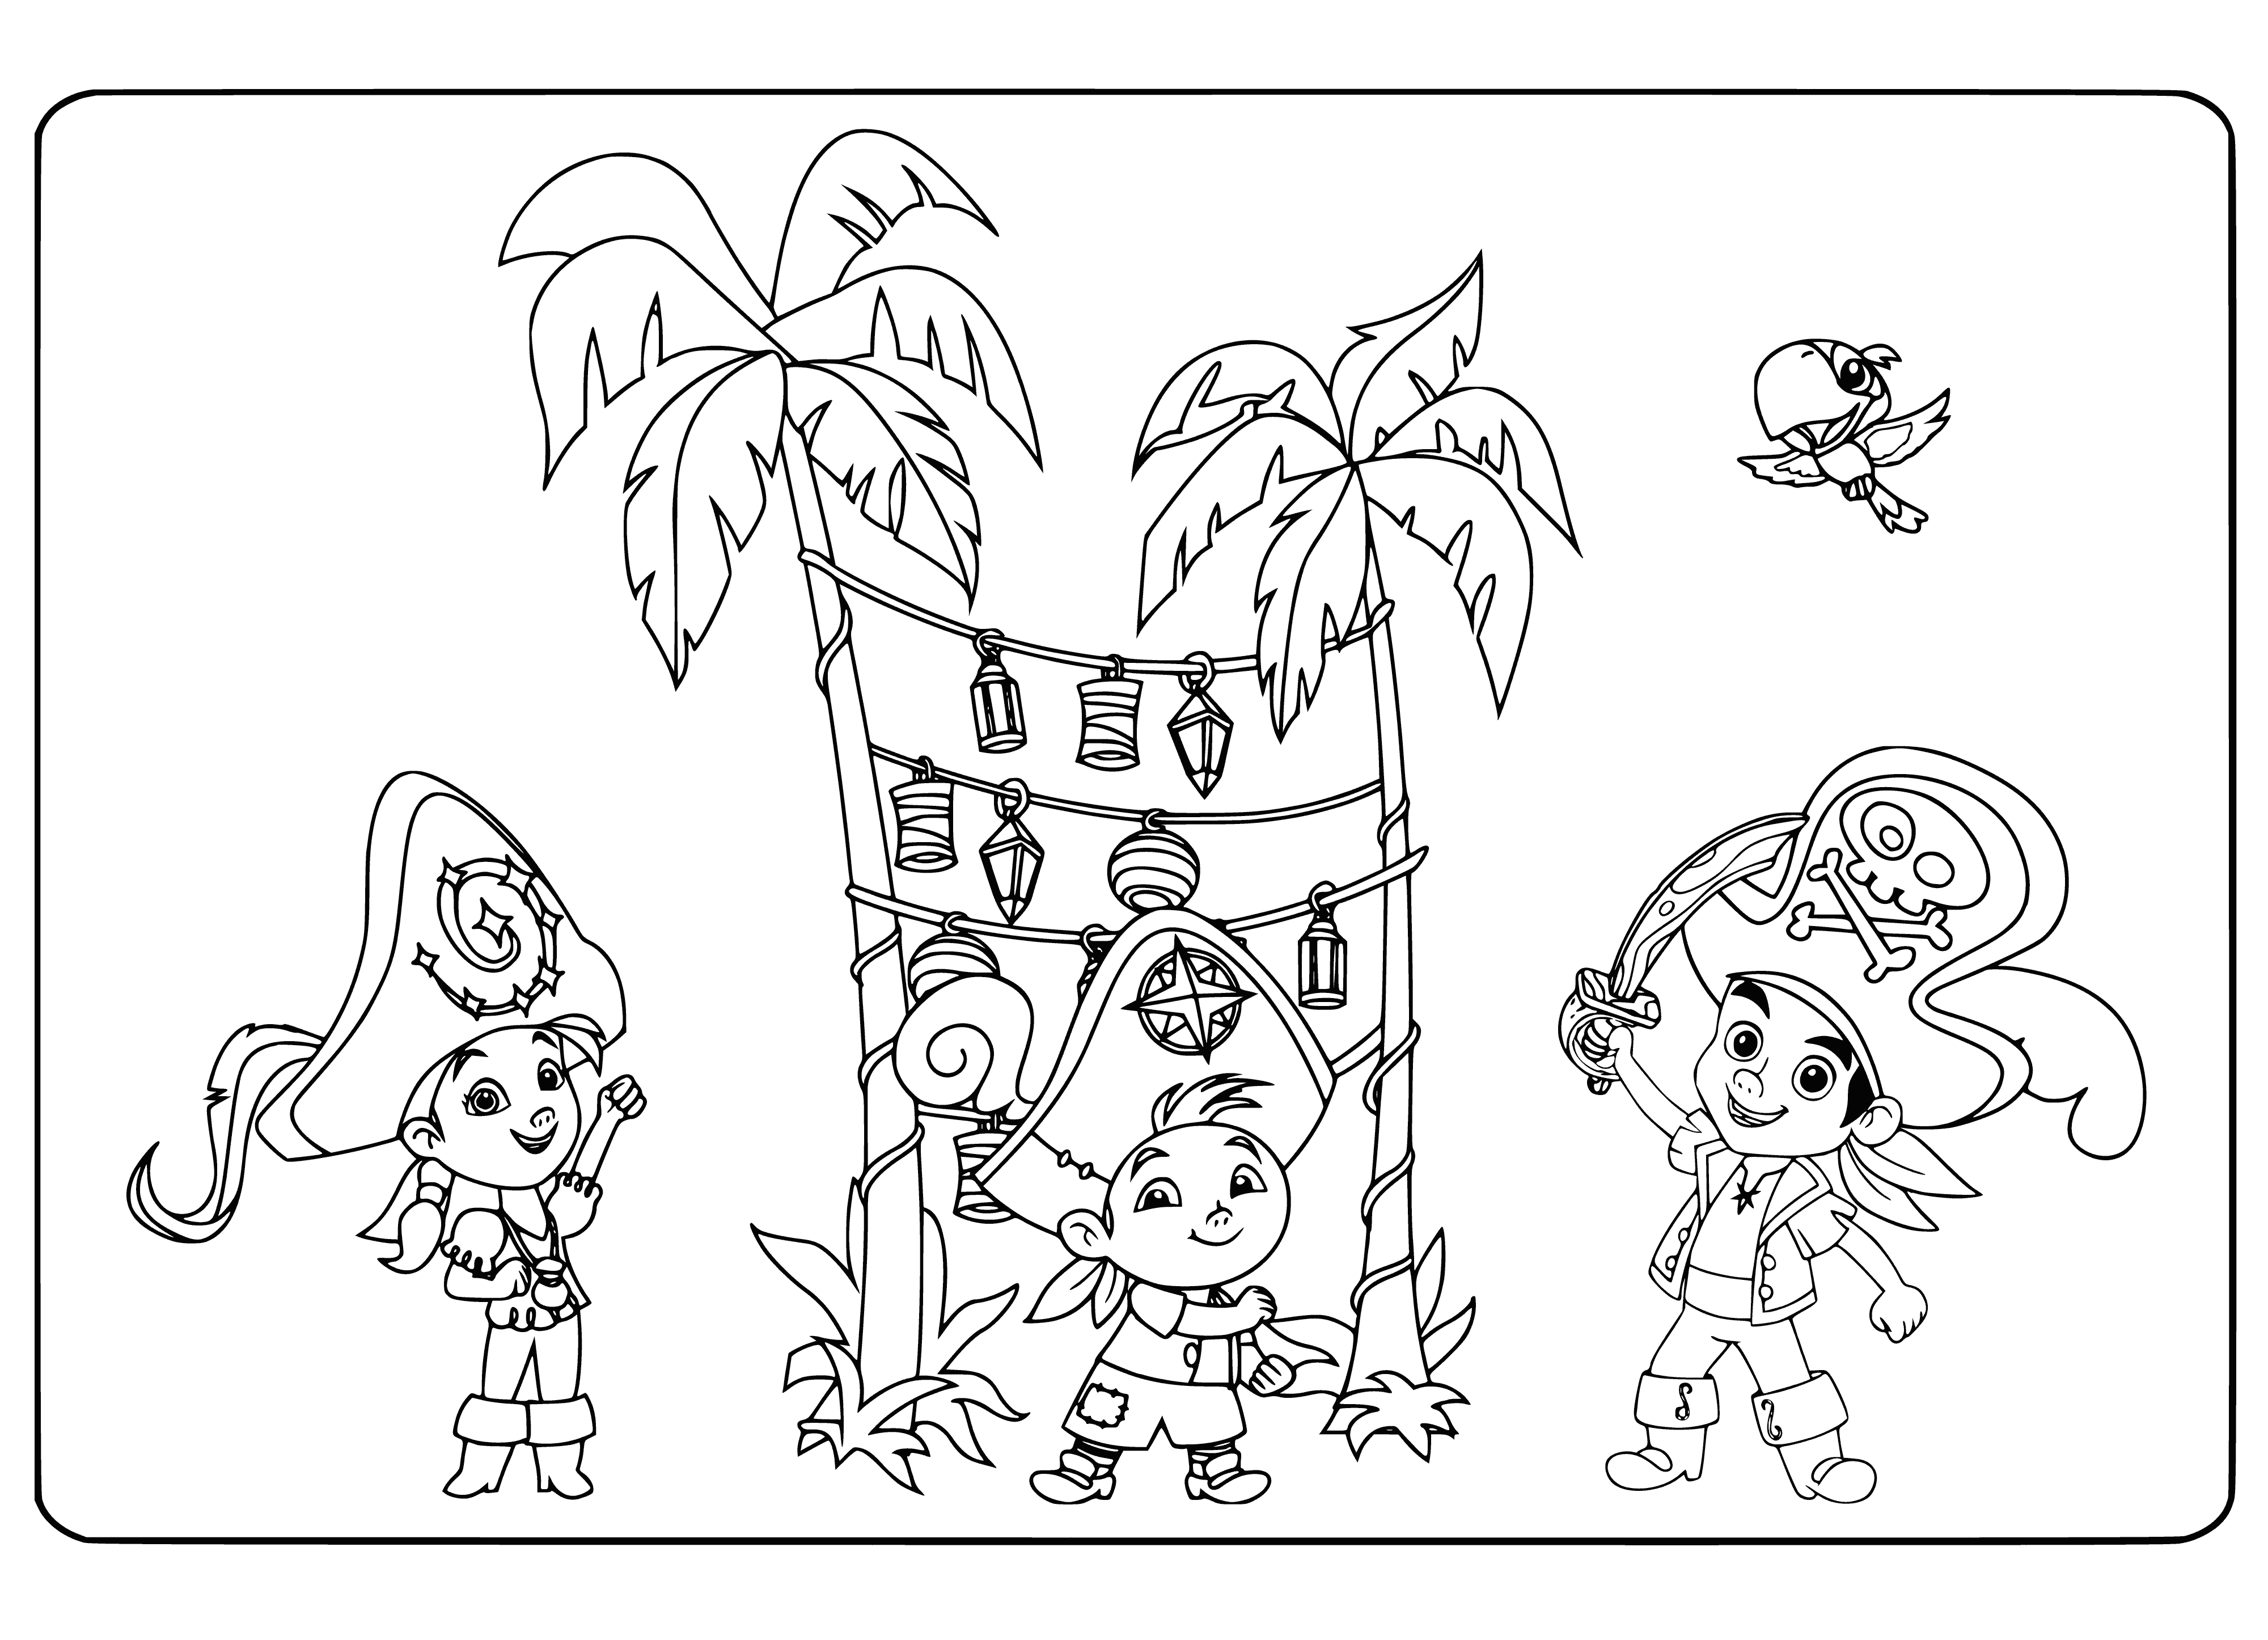 Jake and his team coloring page